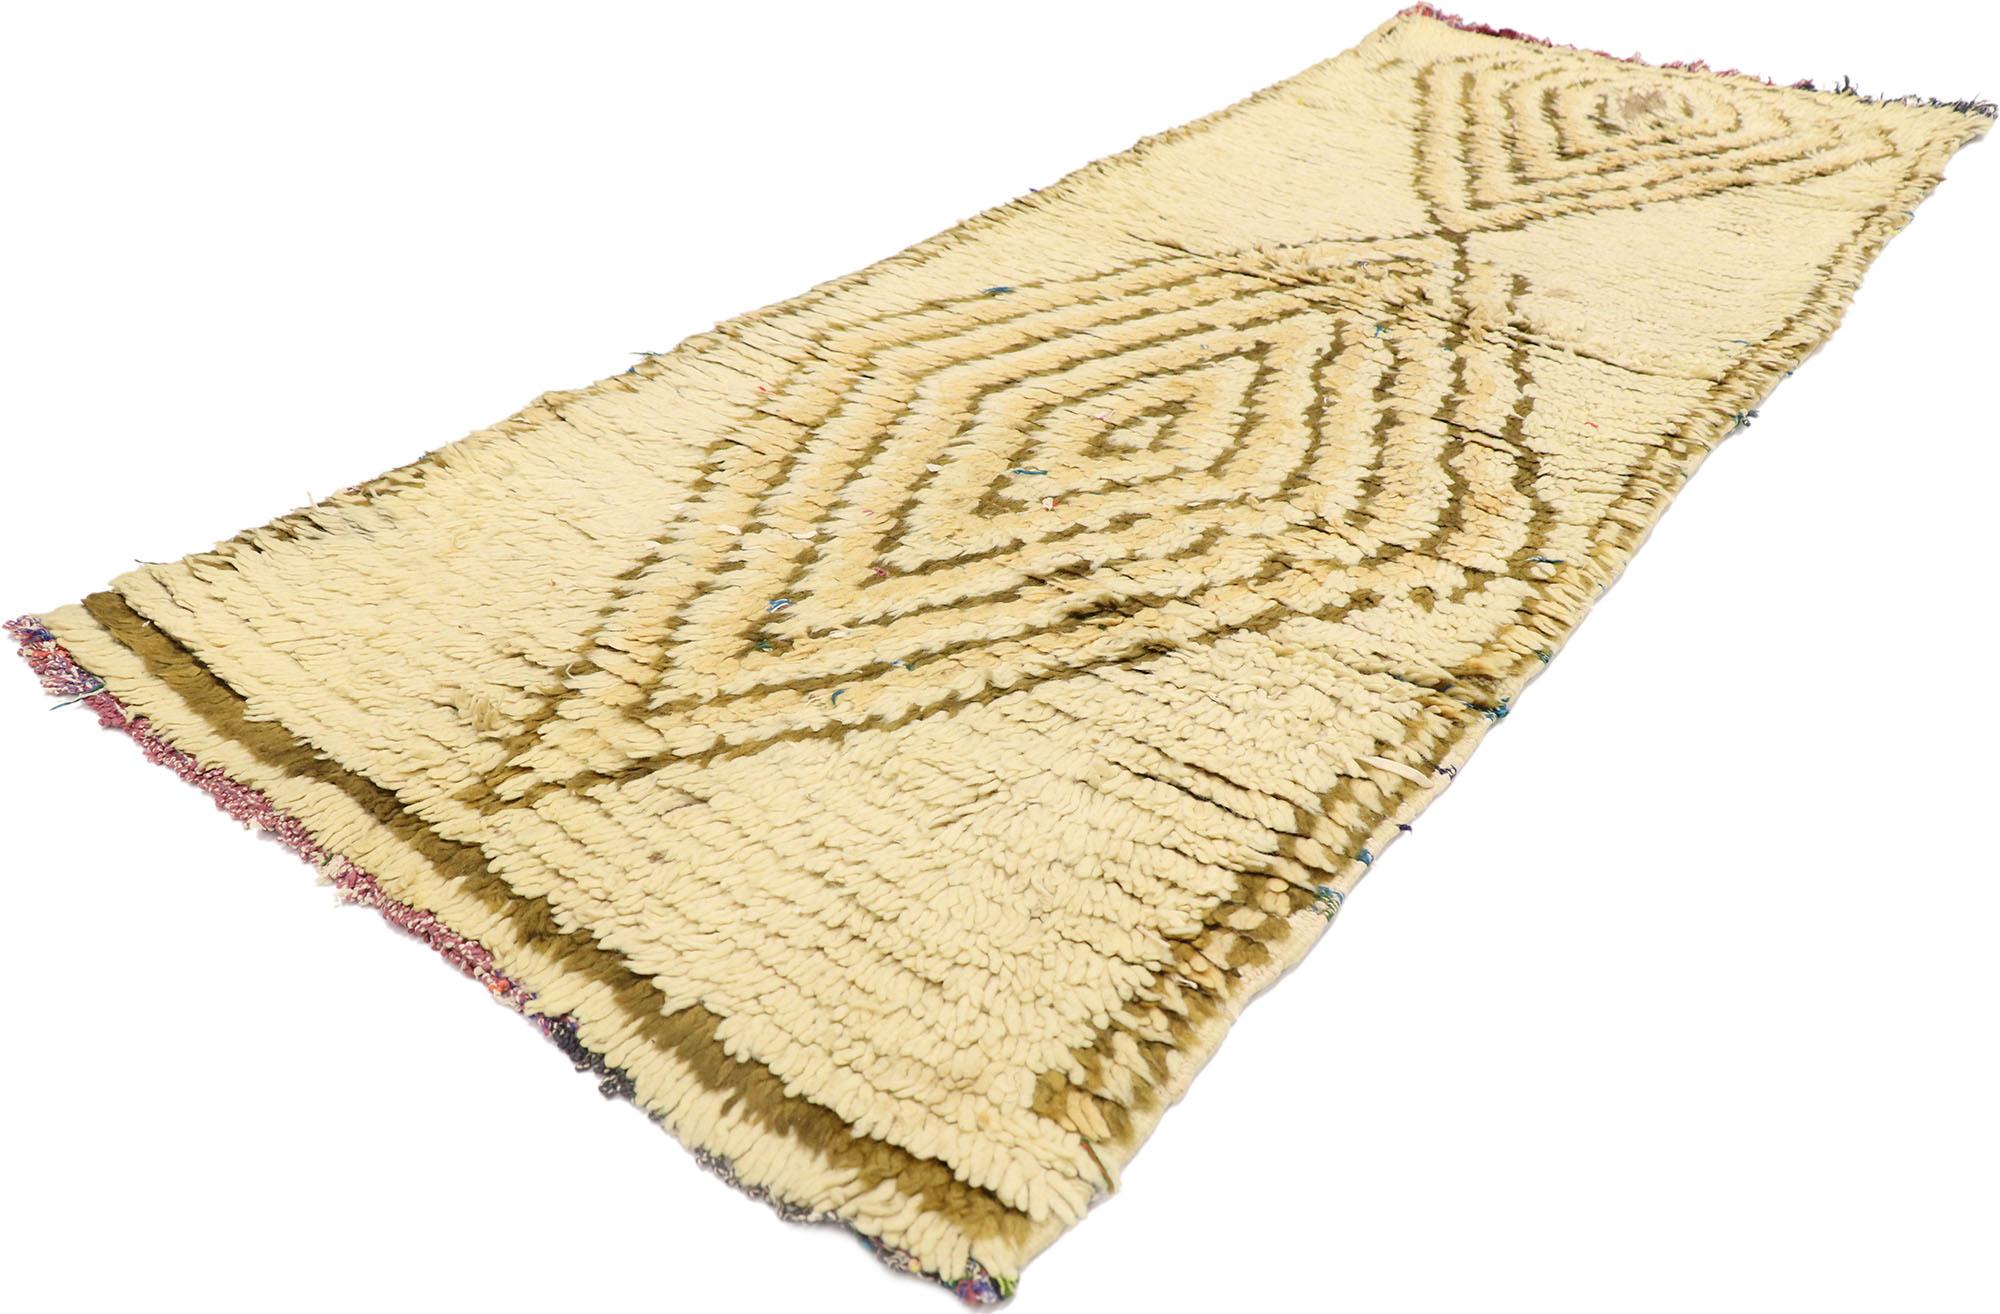 Vintage Berber Moroccan Boucherouite Rug with Modern Style  In Good Condition For Sale In Dallas, TX